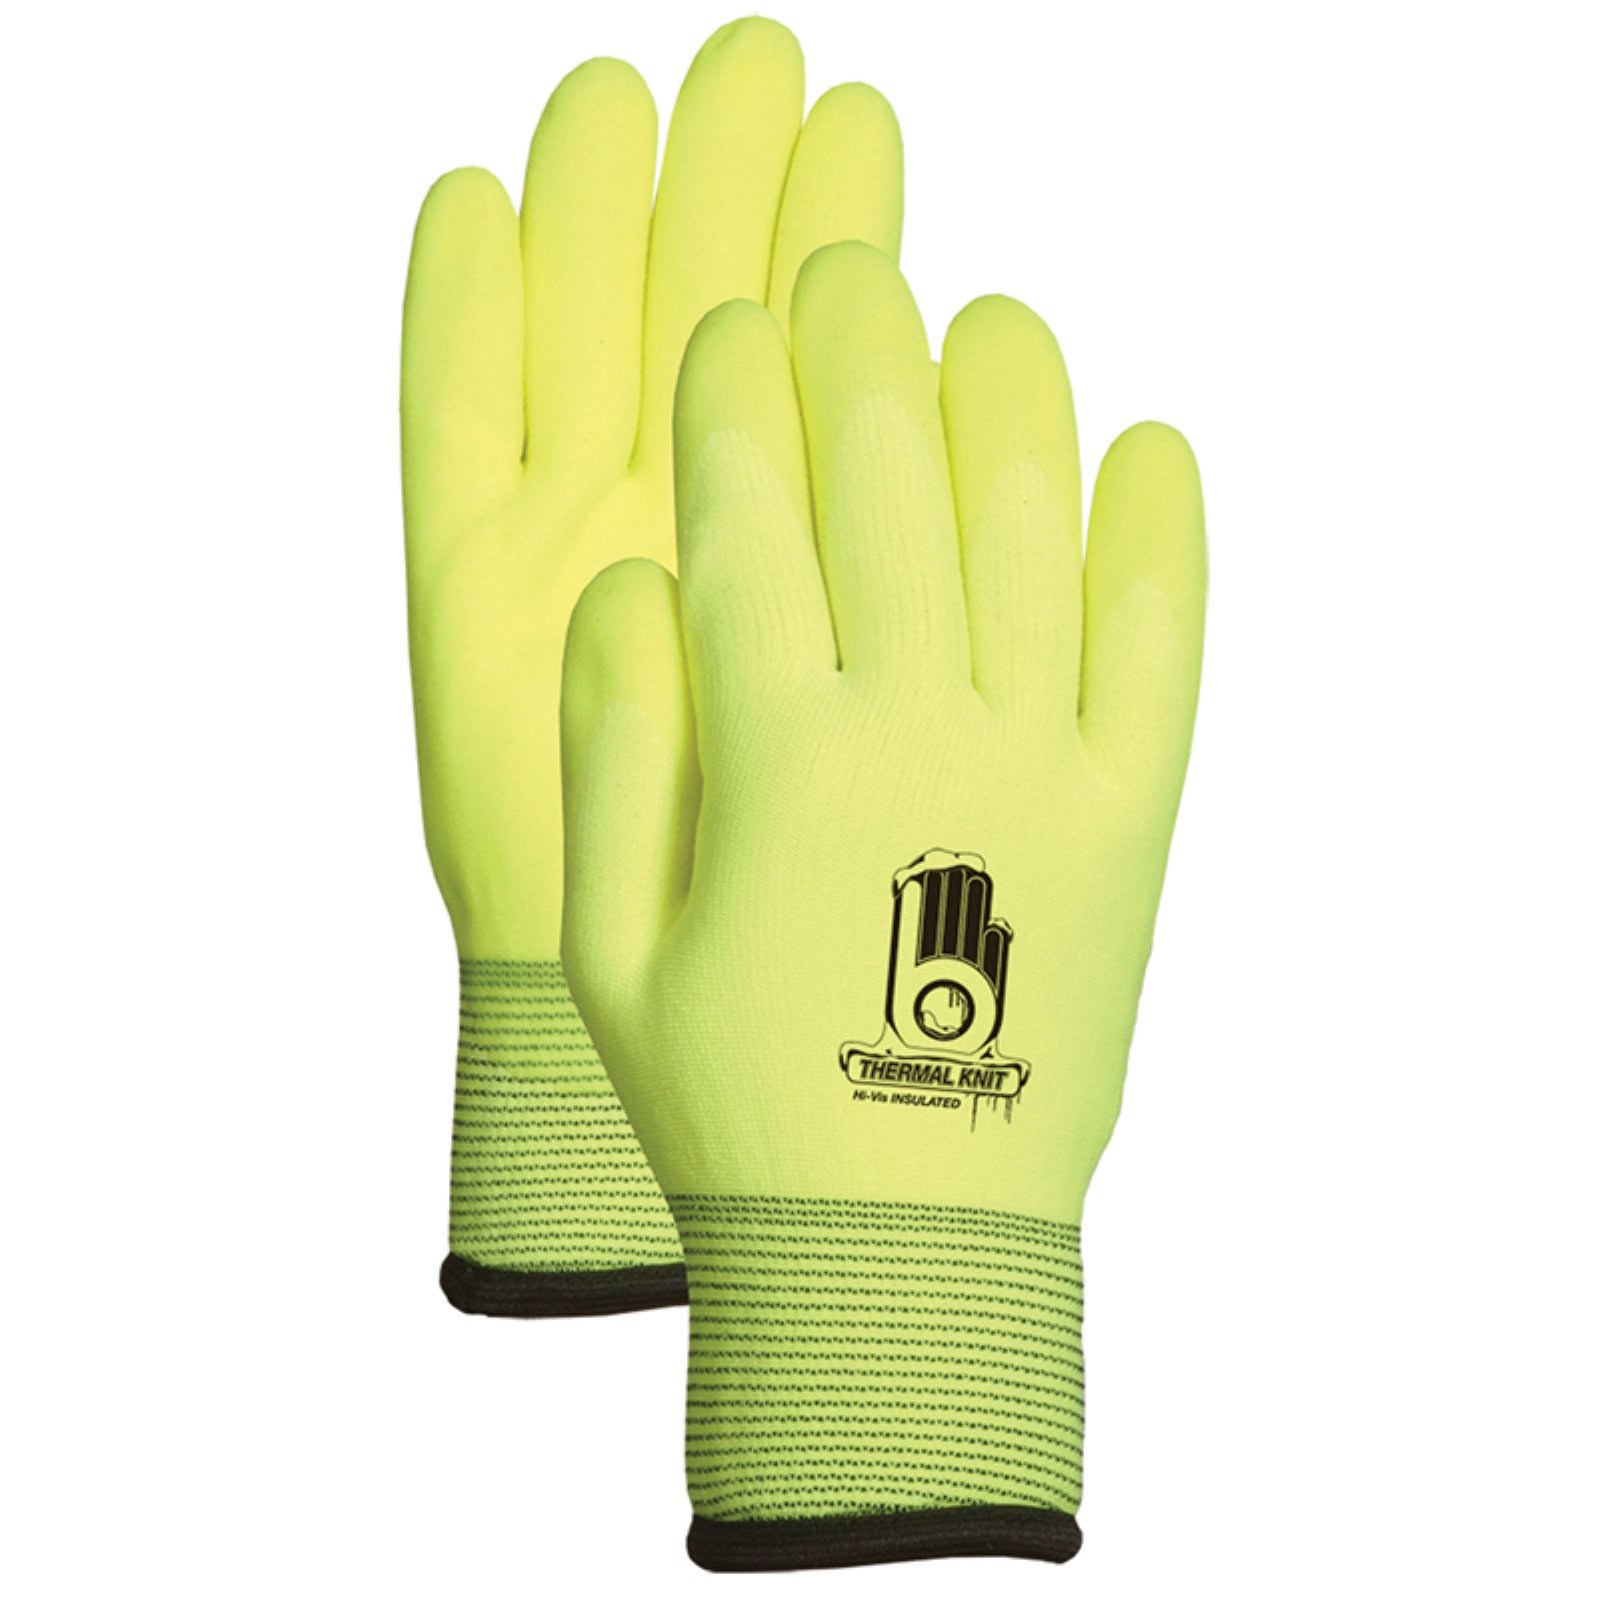 Bellingham Glove C4001L Large HPT? Water Repellent Insulated Glove - image 1 of 1